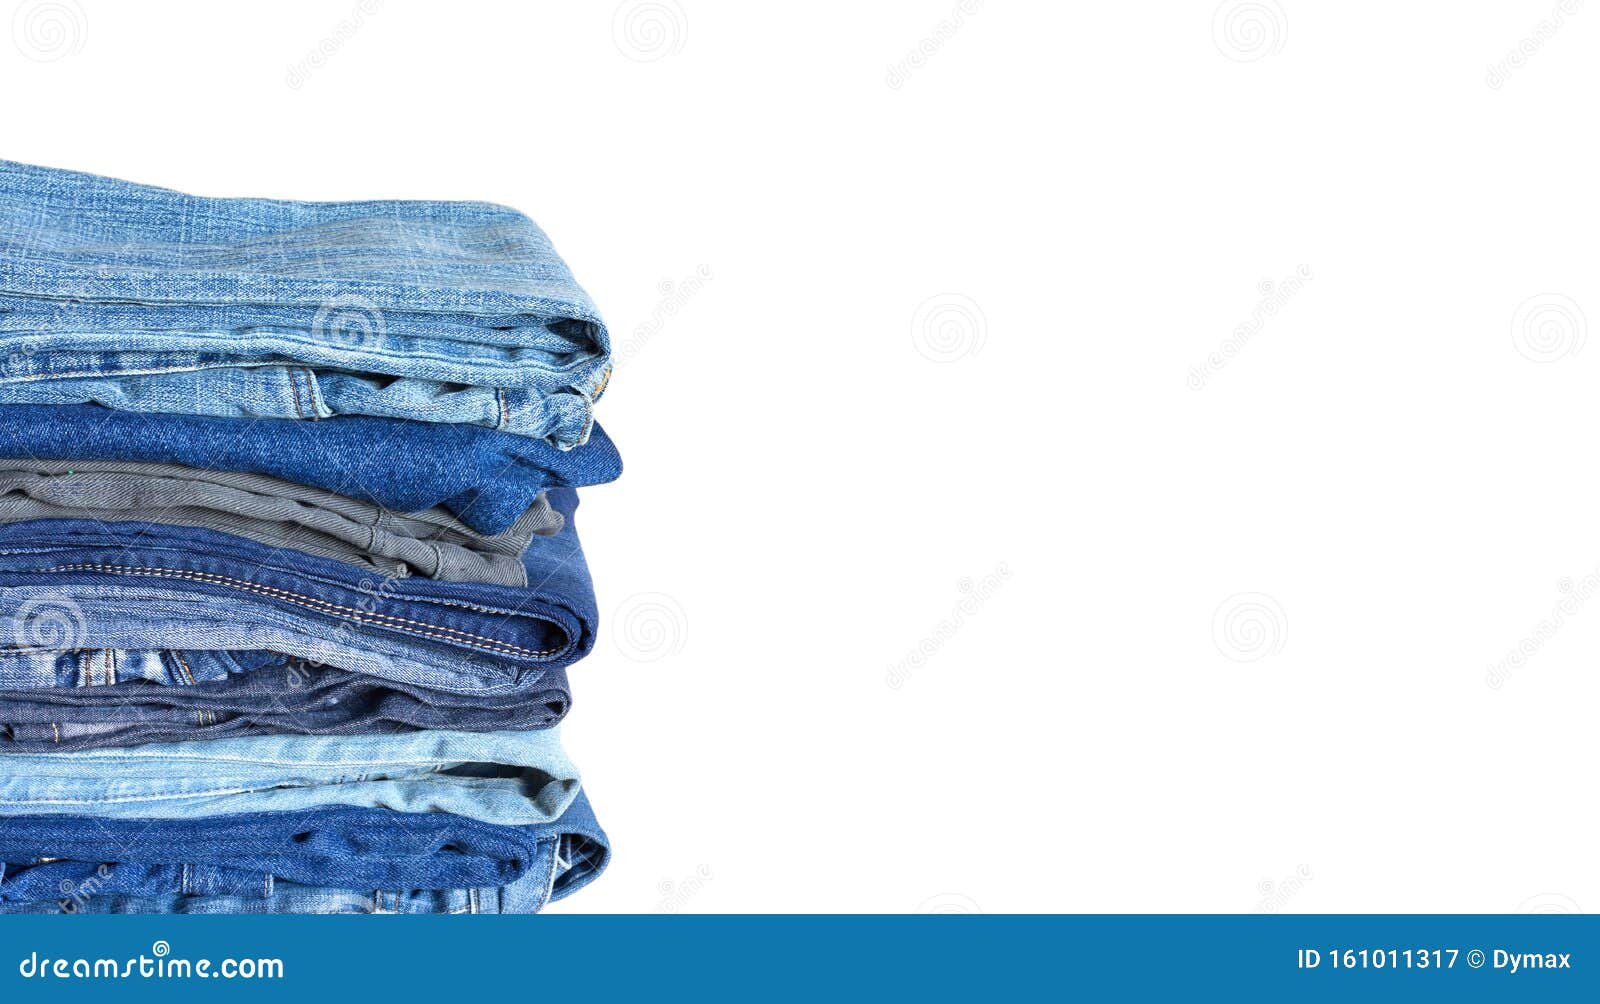 Stack on Many Jeans Isolated on White Close-up Stock Image - Image of ...